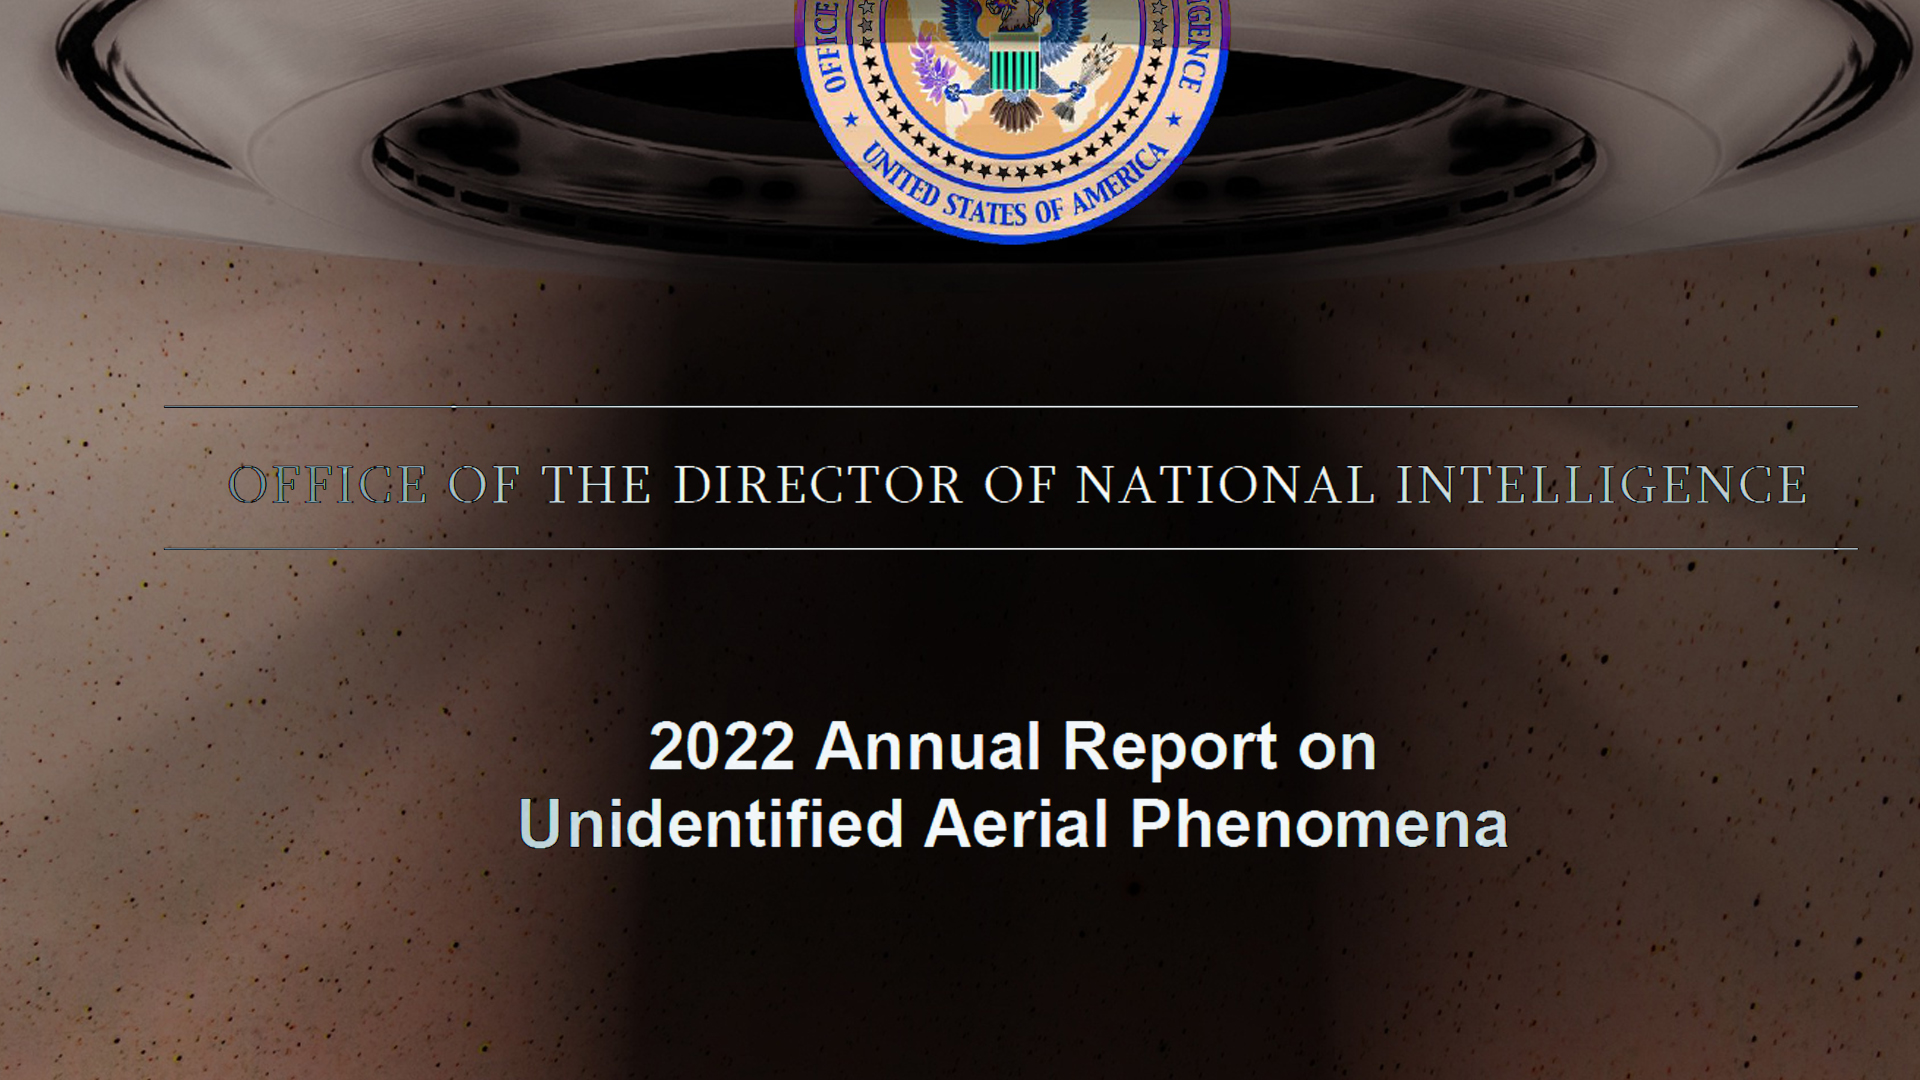 U.S. Government Releases 2nd UAP / UFO Report to the Public